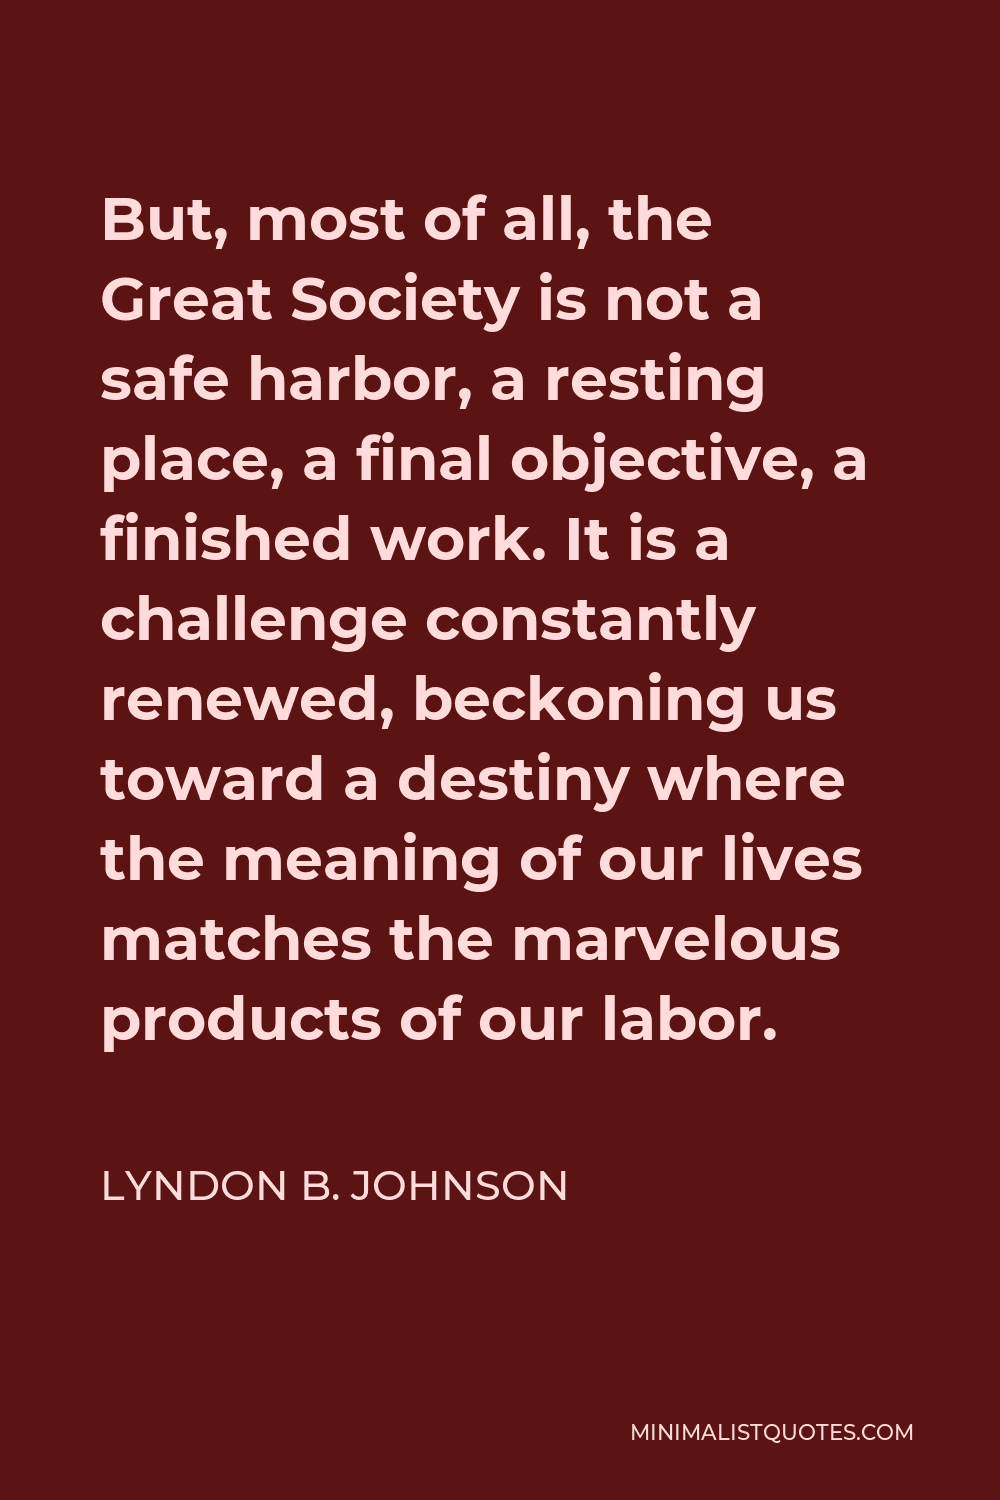 Lyndon B. Johnson Quote - But, most of all, the Great Society is not a safe harbor, a resting place, a final objective, a finished work. It is a challenge constantly renewed, beckoning us toward a destiny where the meaning of our lives matches the marvelous products of our labor.